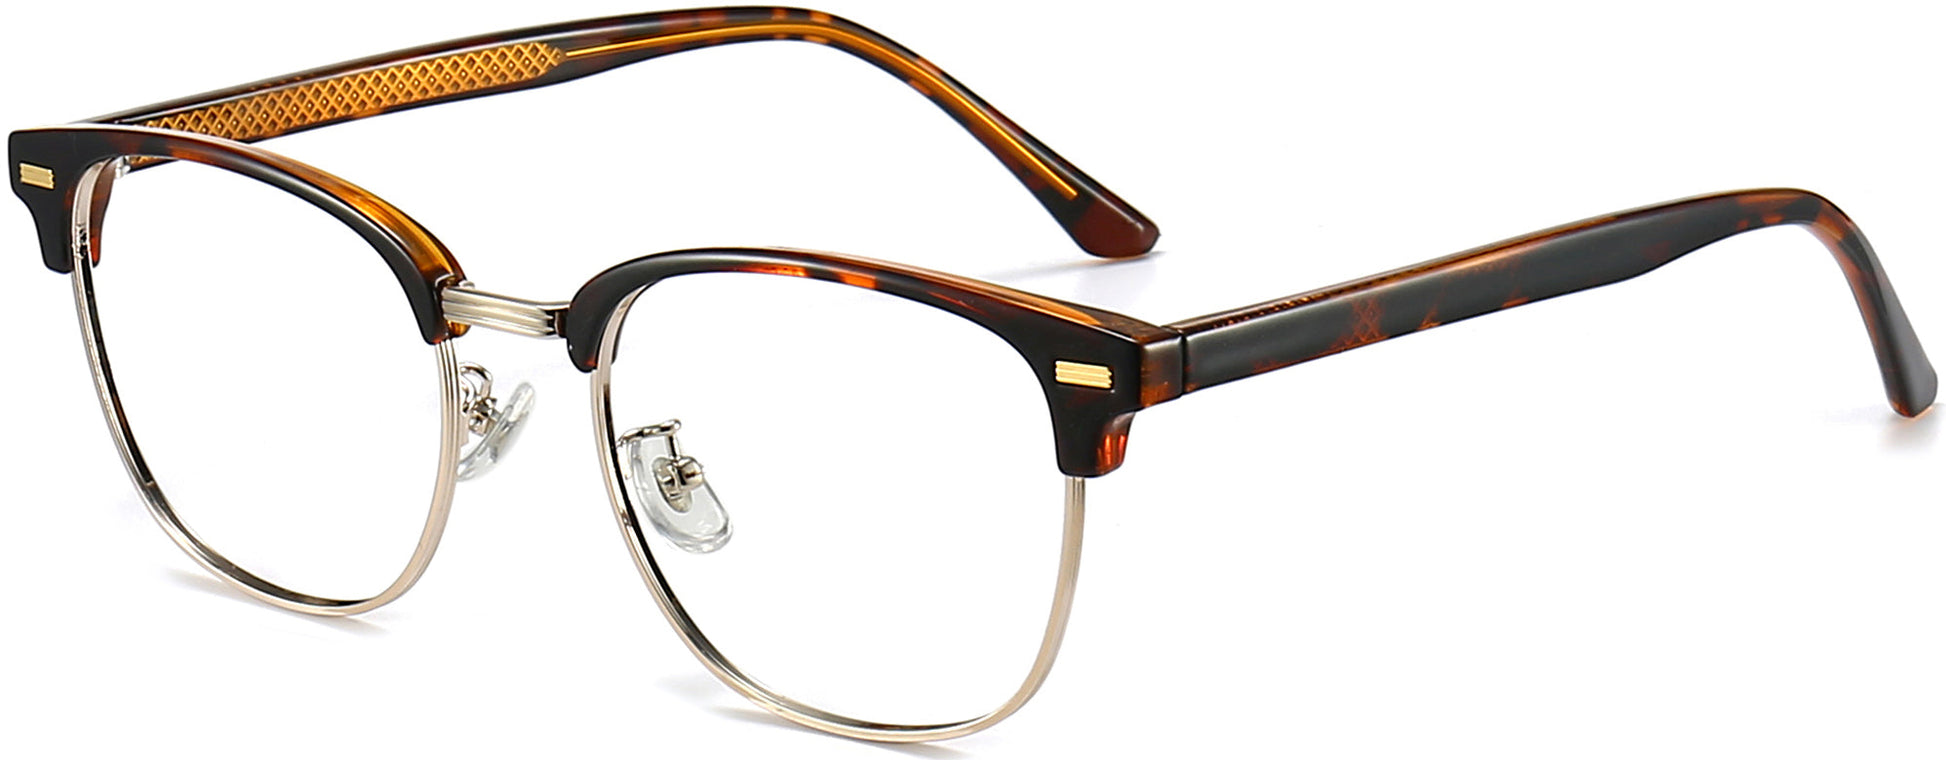 Alexis Browline Tortoise Eyeglasses from ANRRI, angle view